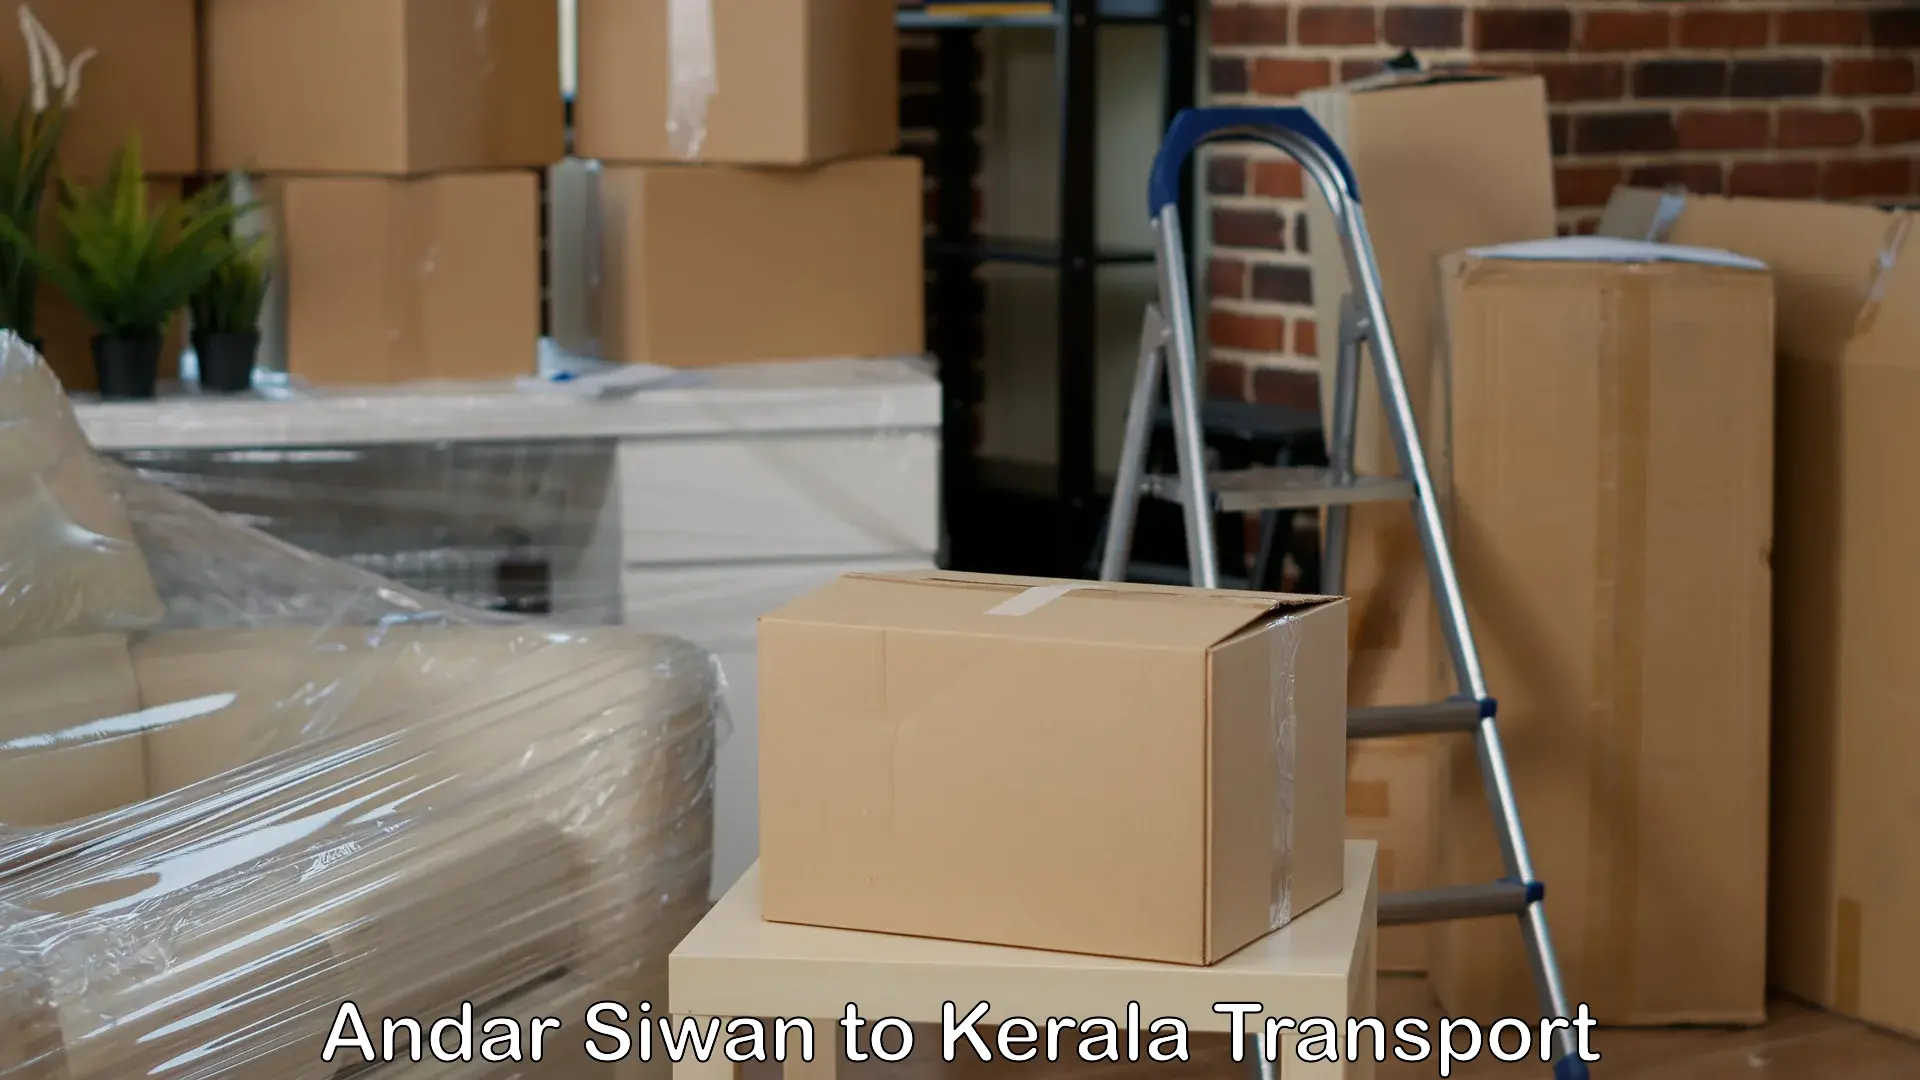 Cargo train transport services Andar Siwan to Pathanamthitta